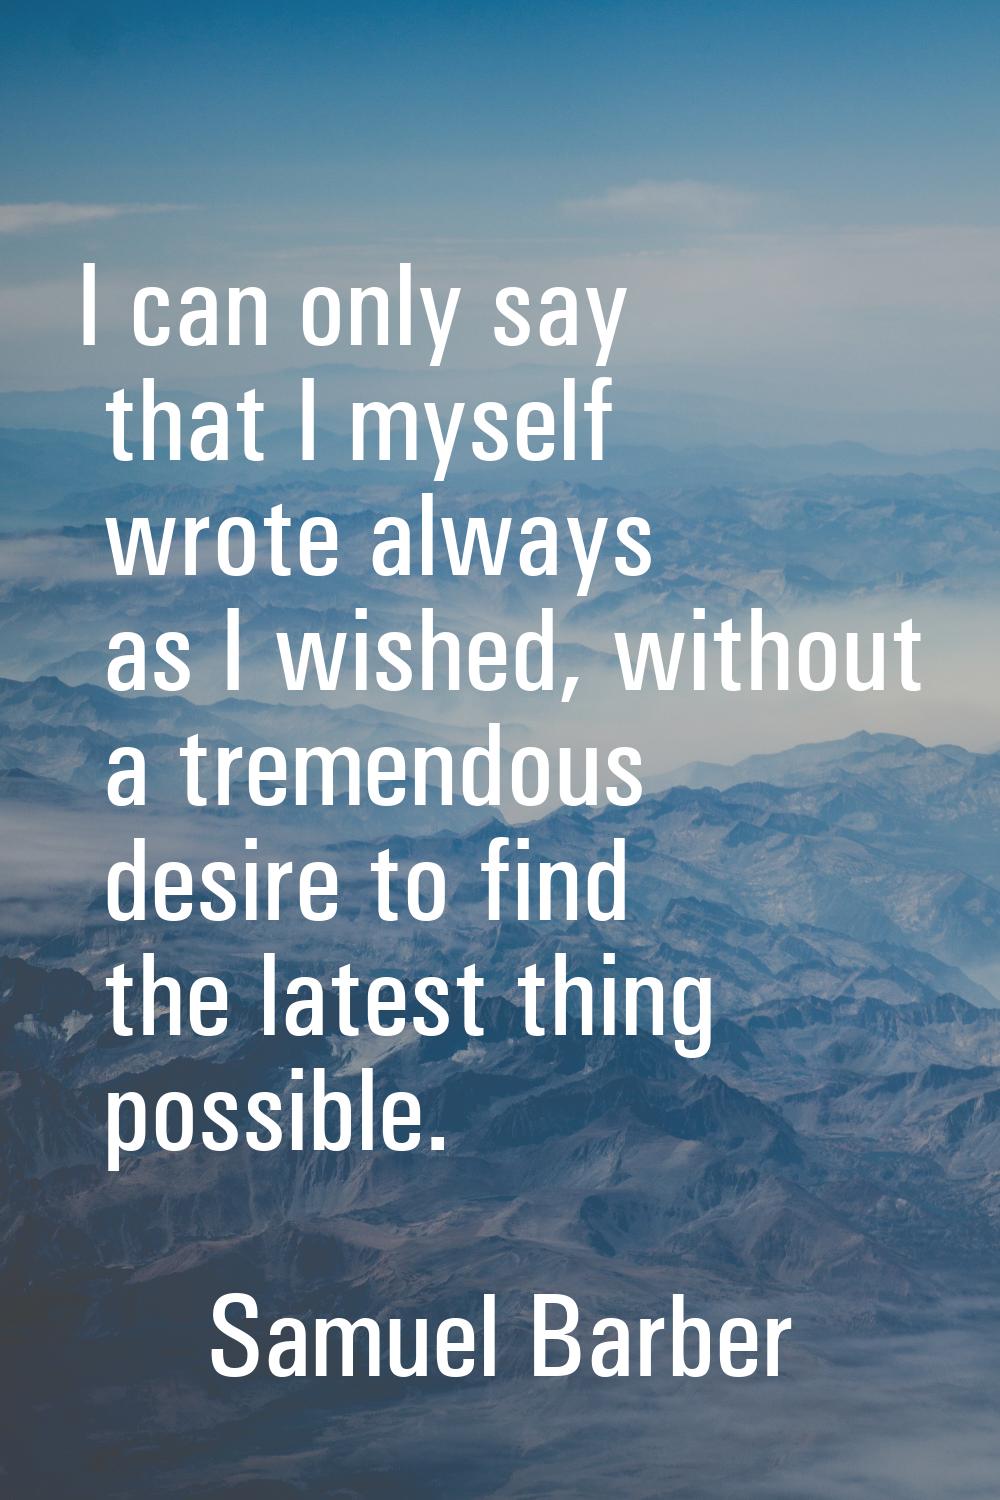 I can only say that I myself wrote always as I wished, without a tremendous desire to find the late